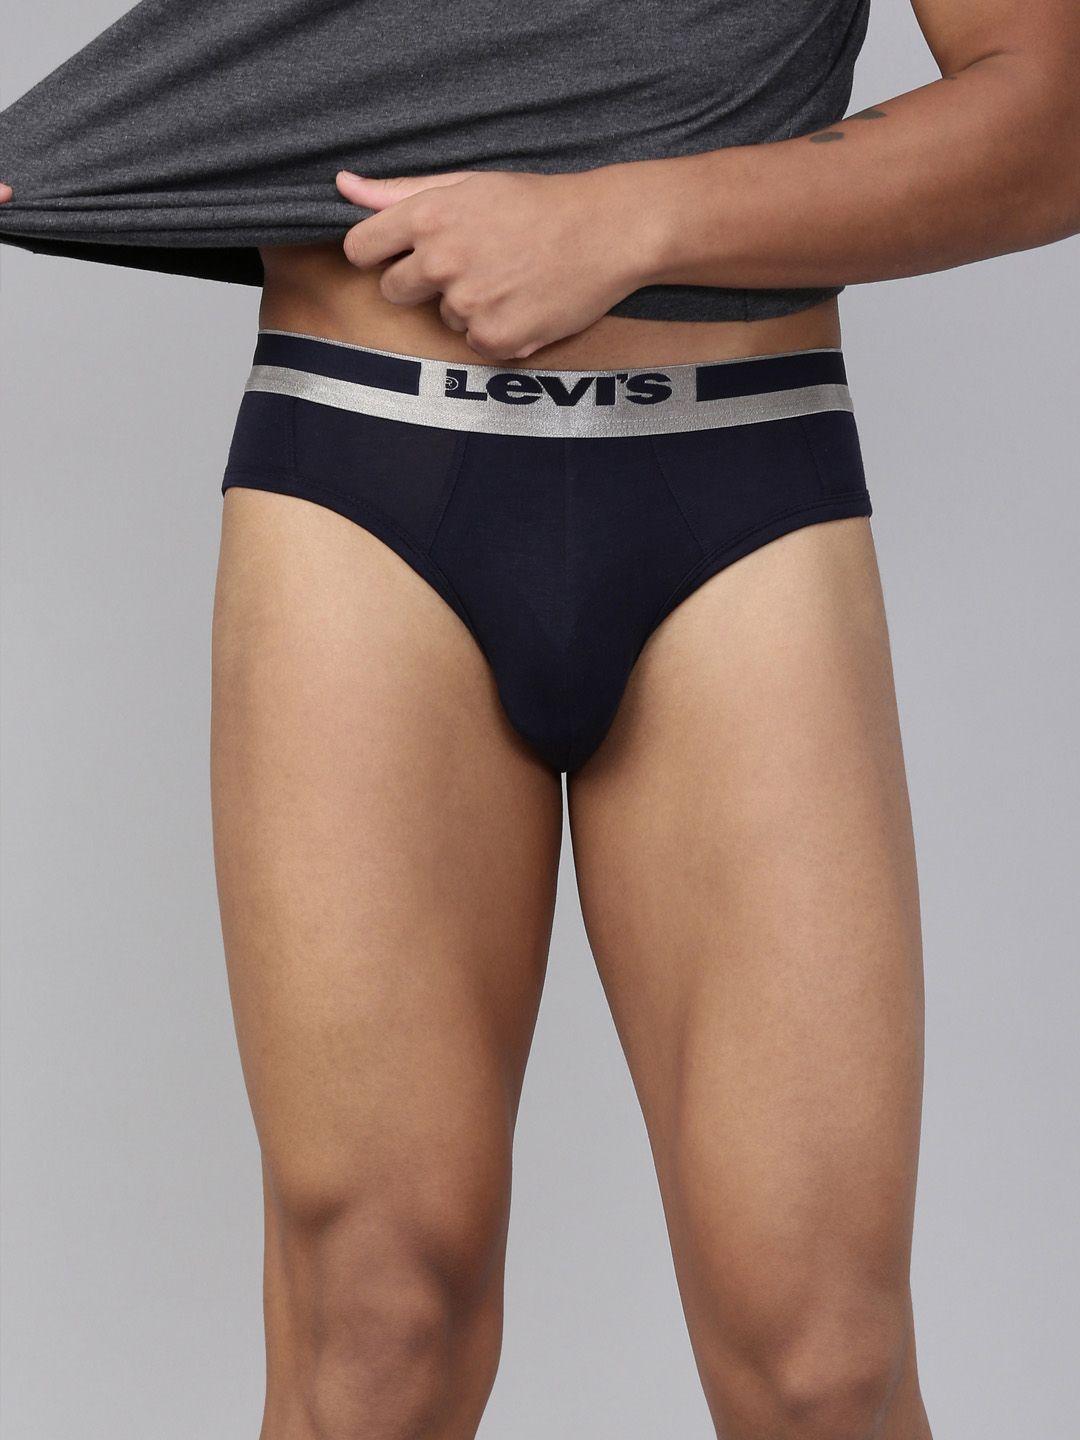 levis-men-smartskin-technology-supima-cotton-briefs-with-tag-free-comfort-029